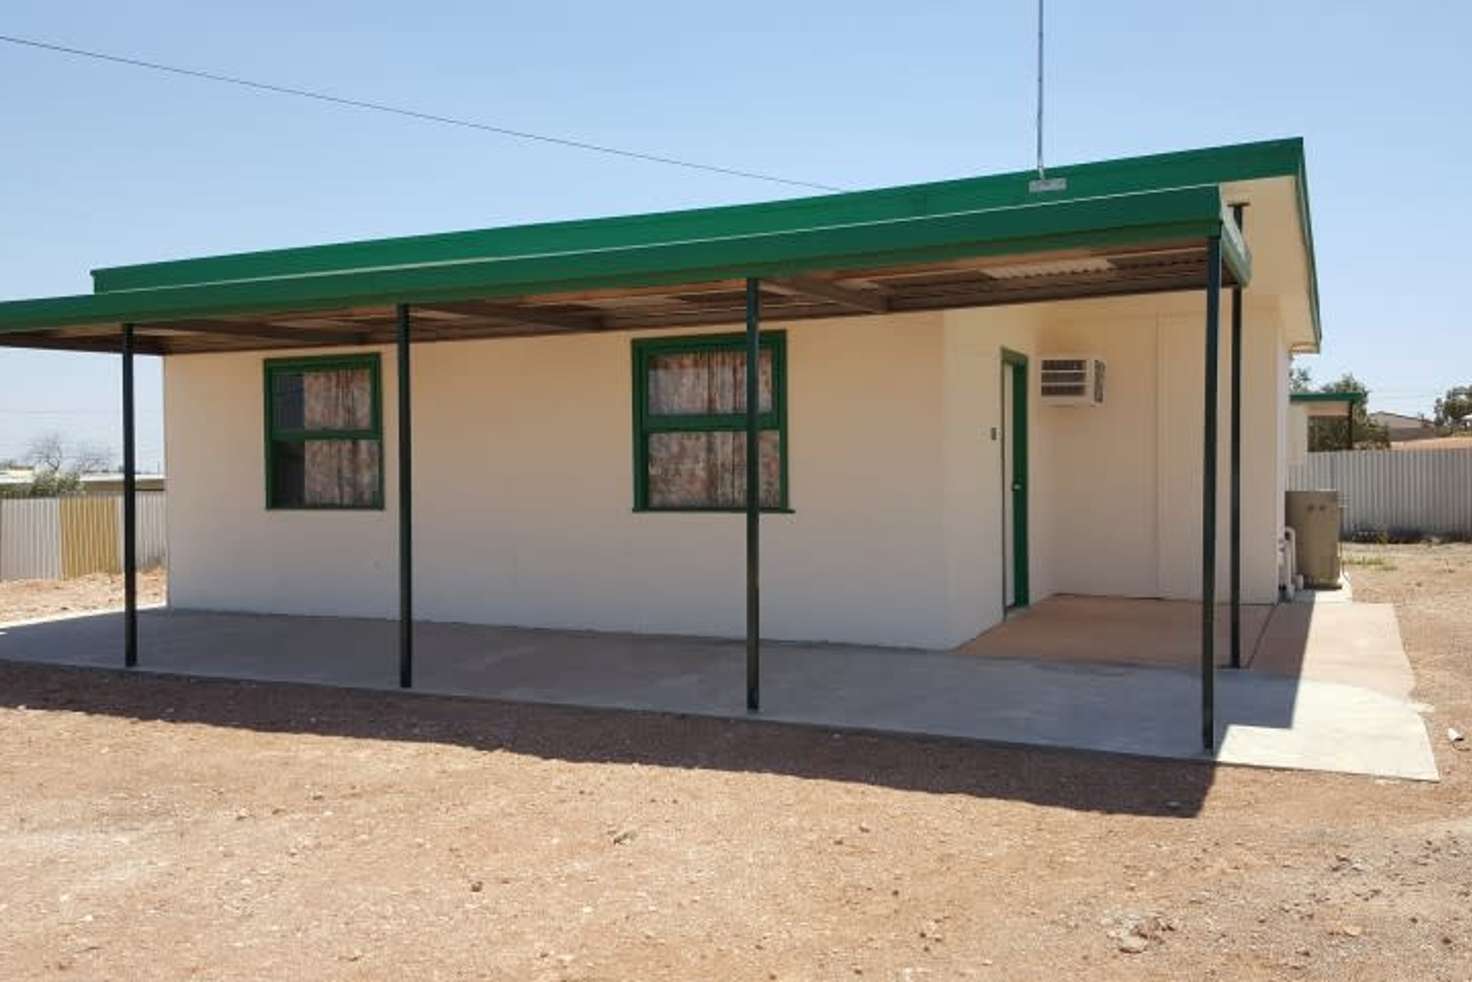 Main view of Homely house listing, 1/ Lot 728 Watkins St, Coober Pedy SA 5723